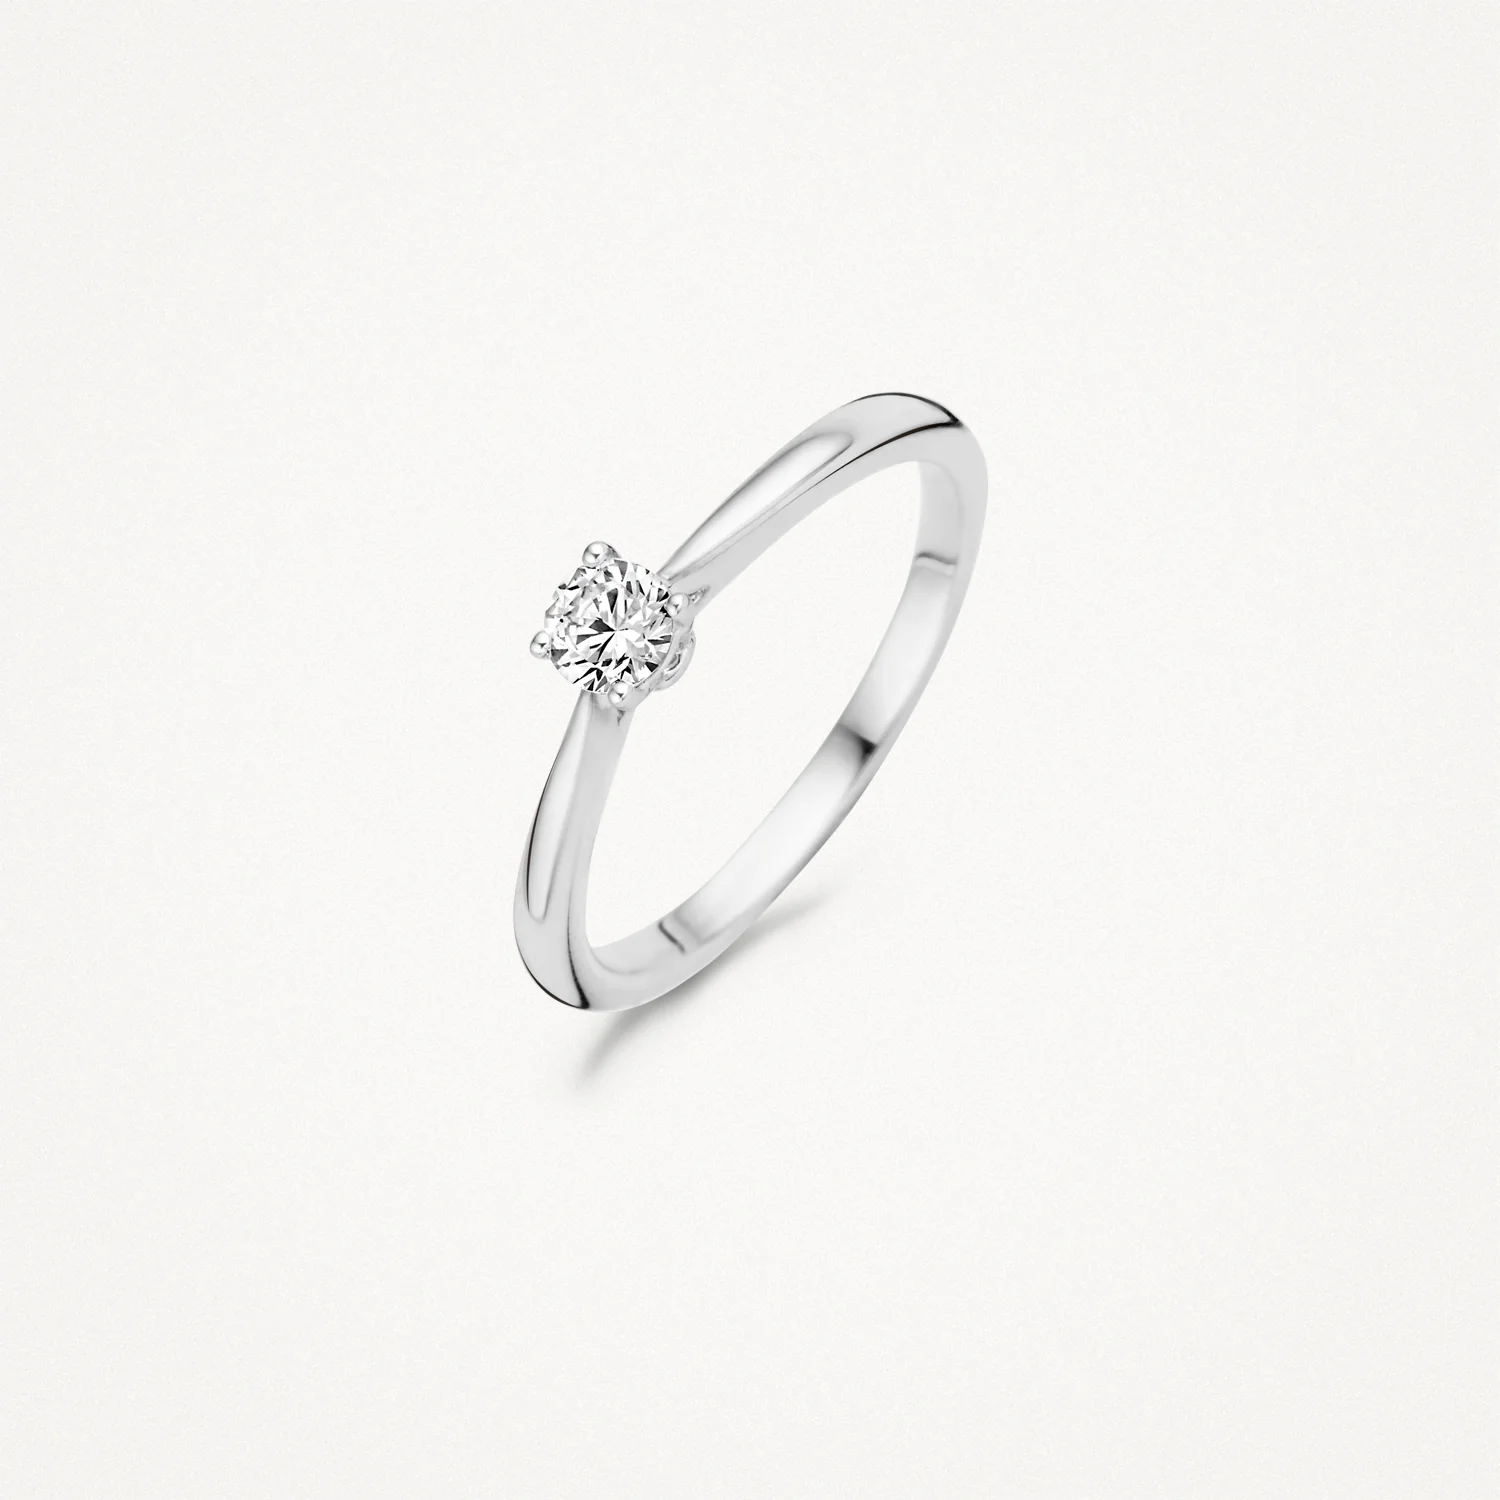 Blush 14ct. White Gold CZ Solitaire Ring